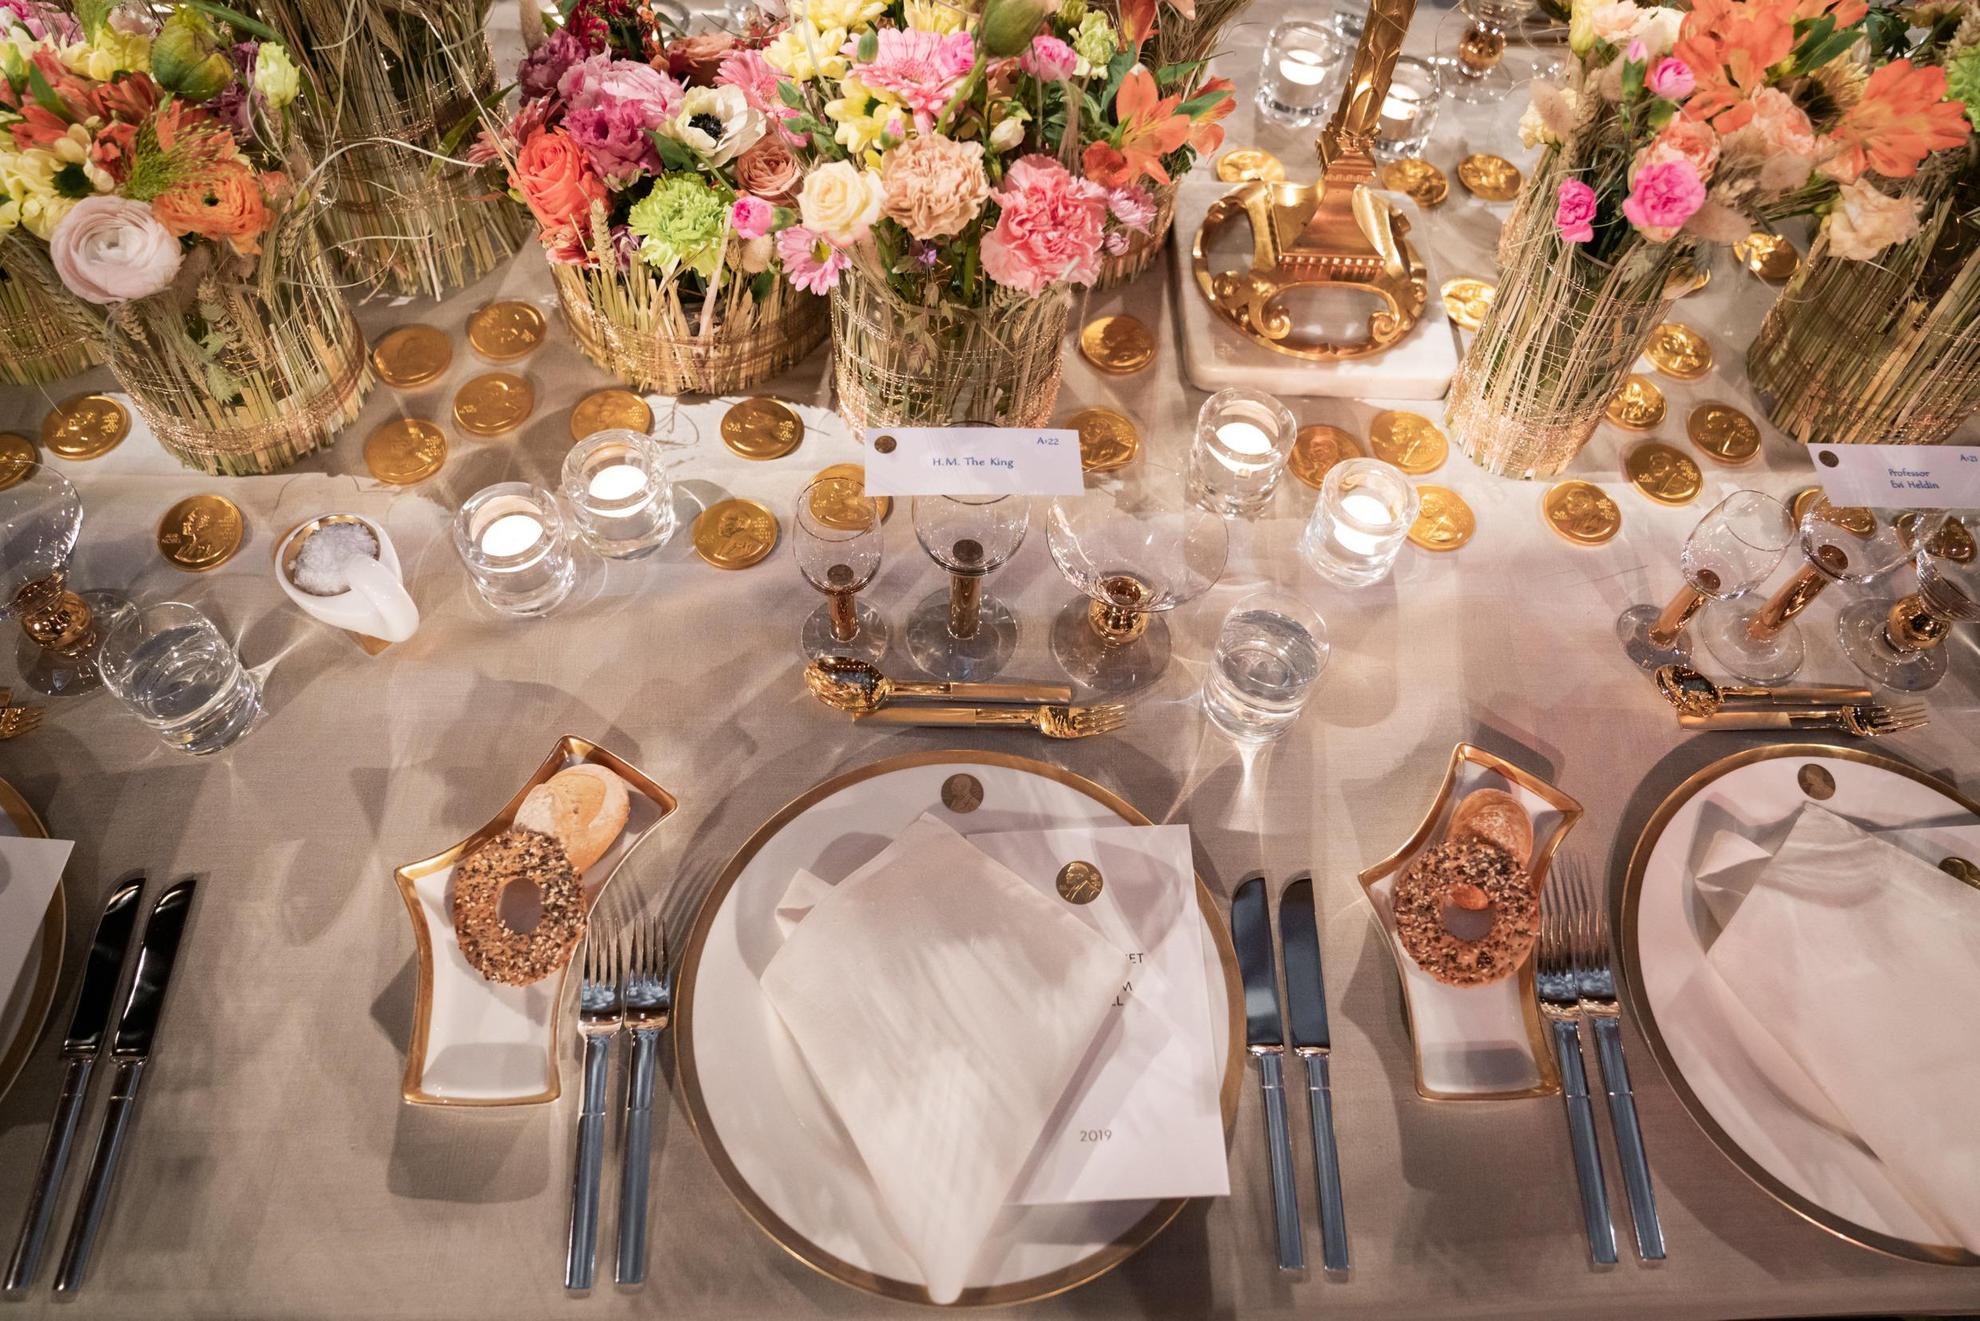 A tableware in white with golden details is set on a table with a white tablecloth. In the middle of the table are colorful flowers in vases.